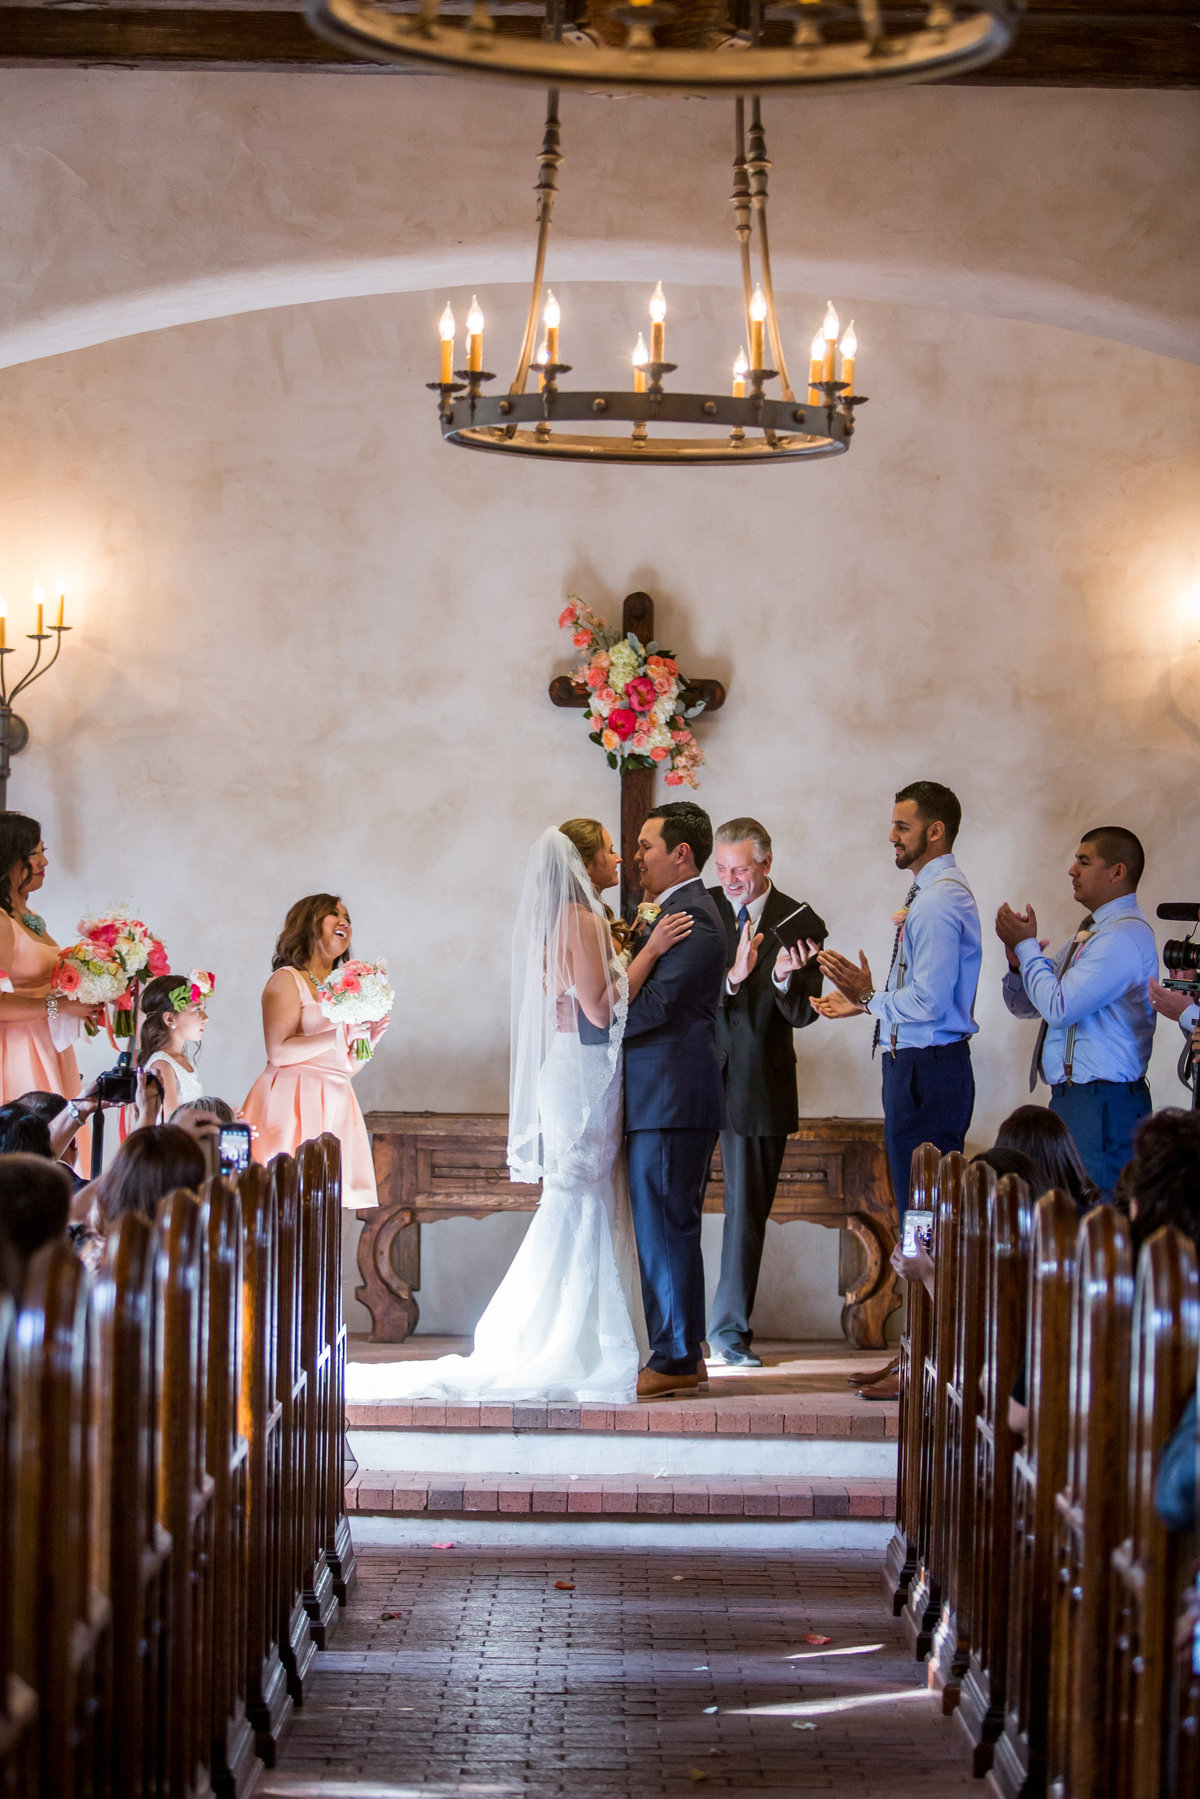 Bride and groom hold each other during wedding ceremony at Lost Mission venue in Hill Country